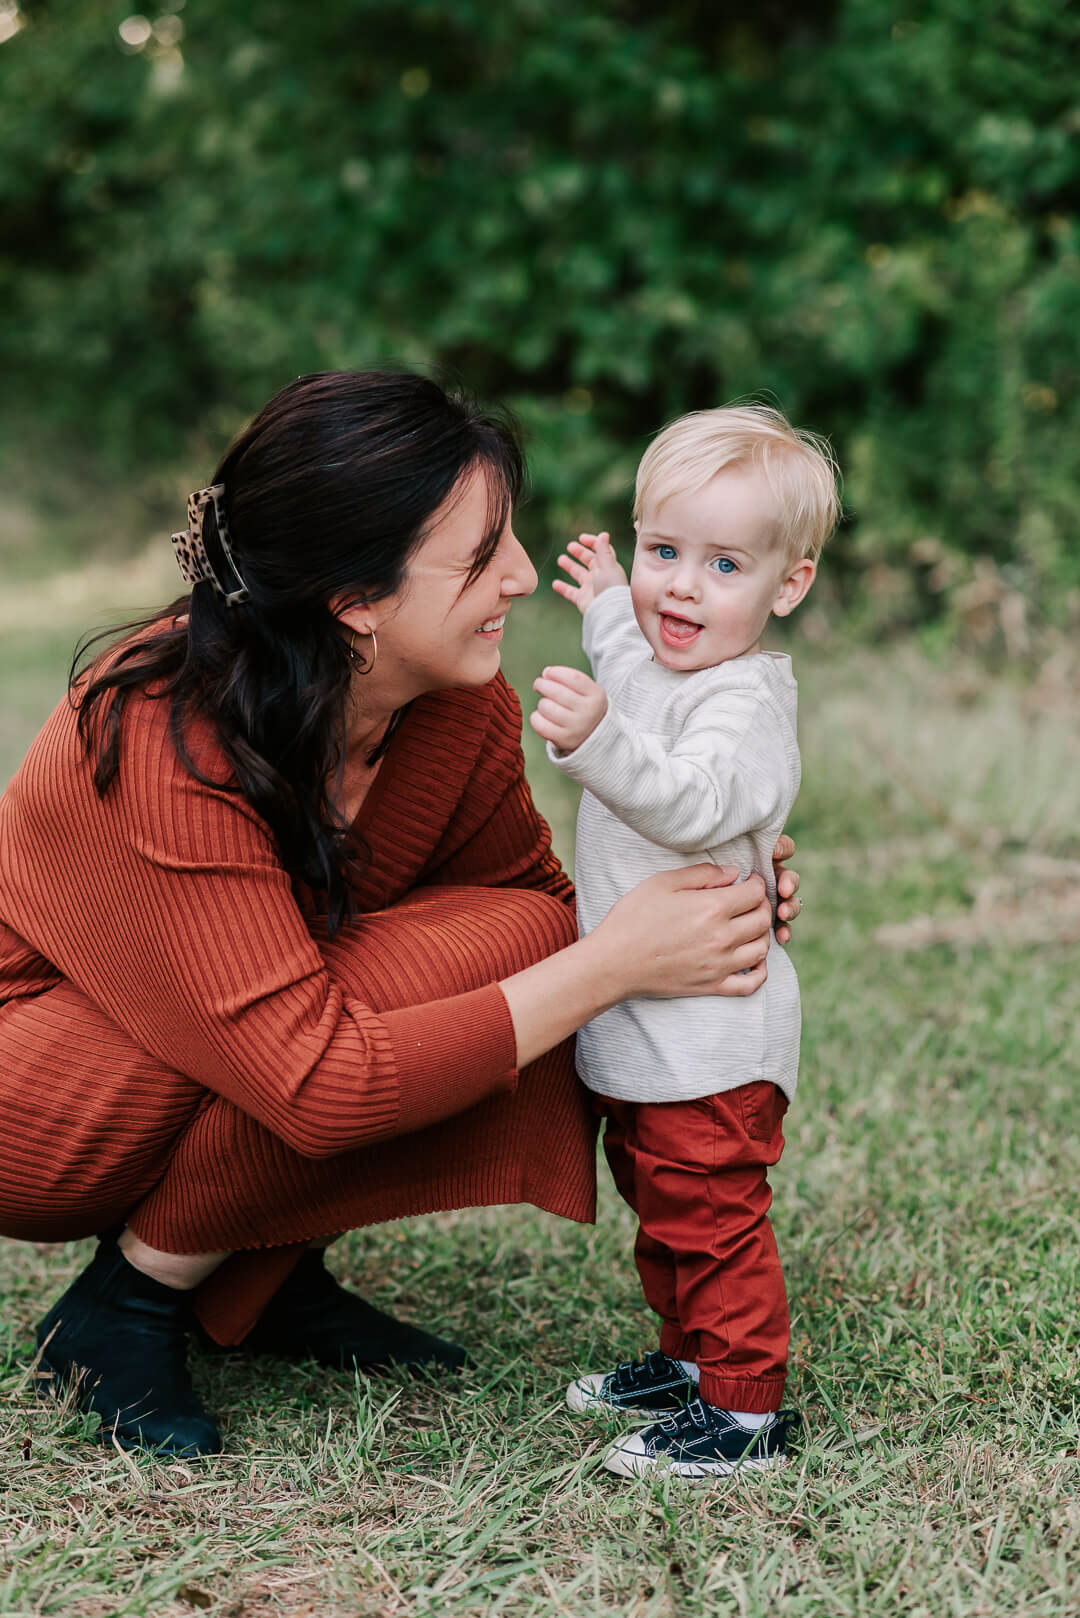 A happy mother plays with her talkative toddler son in a park field of grass while wearing a red dress before visiting a childrens museum northern virginia